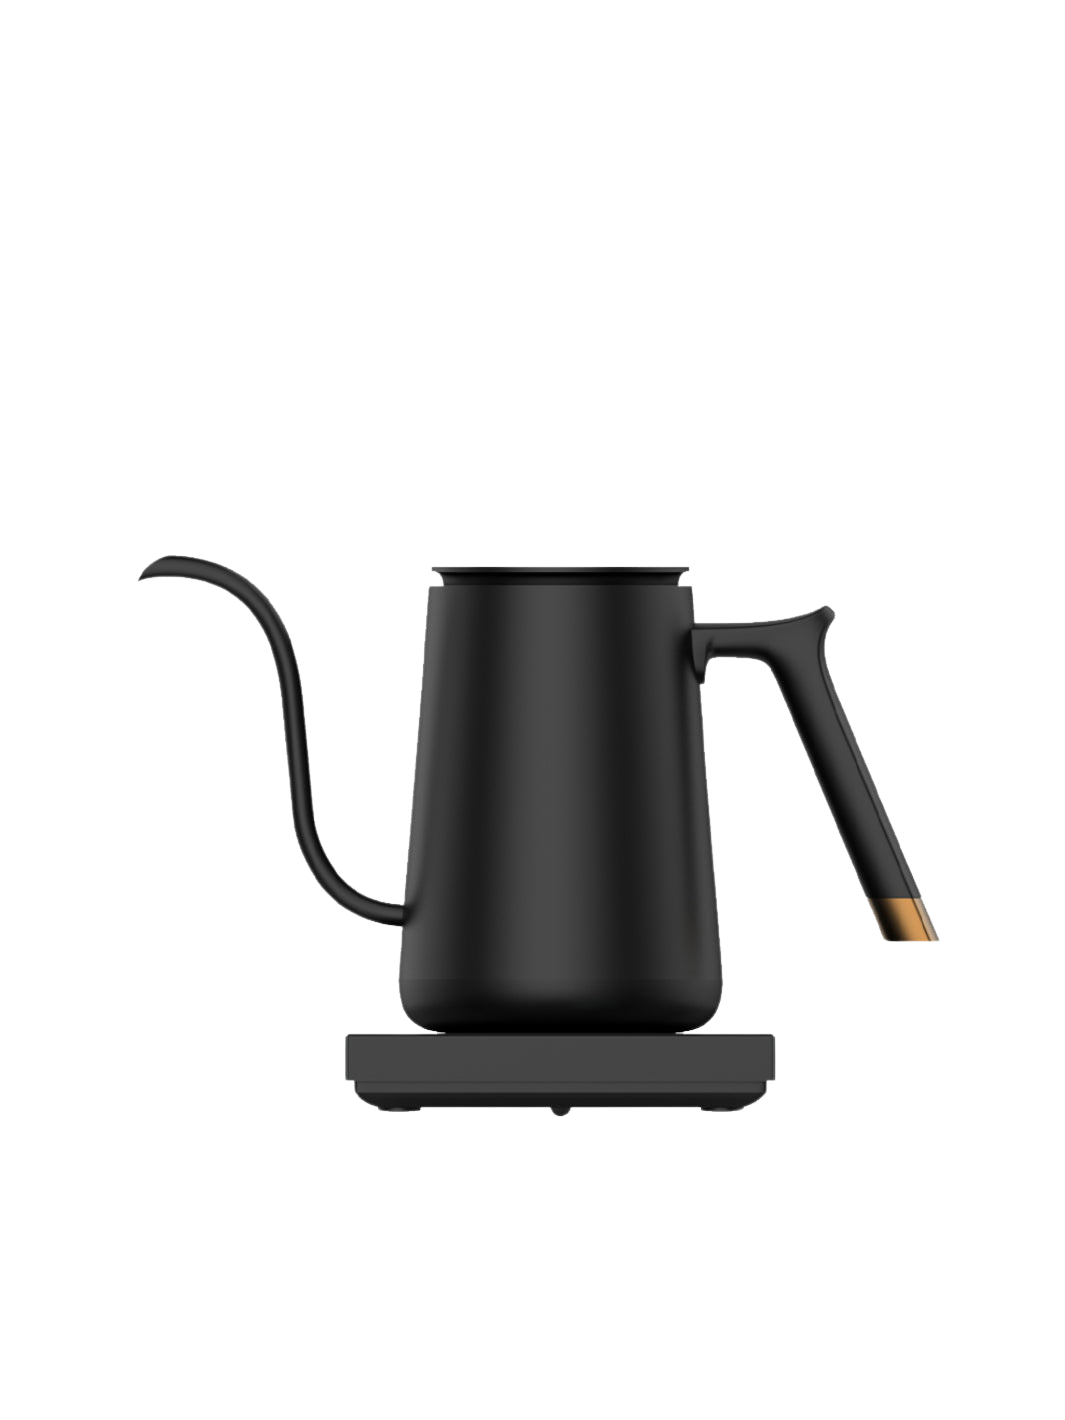 Timemore Fish Electric Pourover Kettle (600mL/1000W)